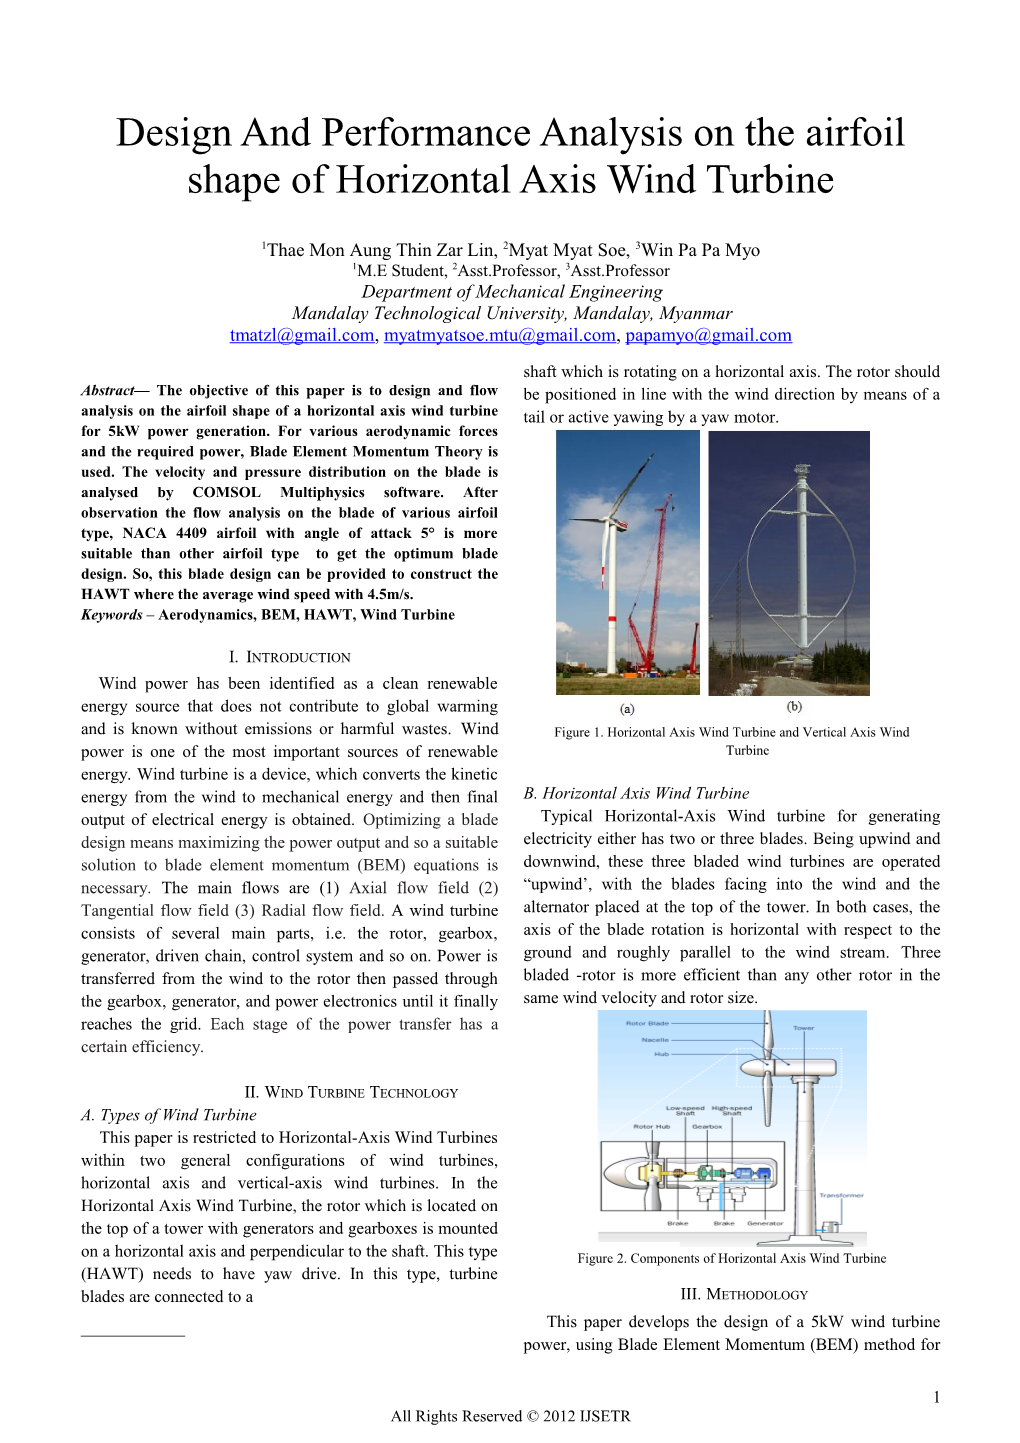 Design and Performance Analysis on the Airfoil Shape of Horizontal Axis Wind Turbine